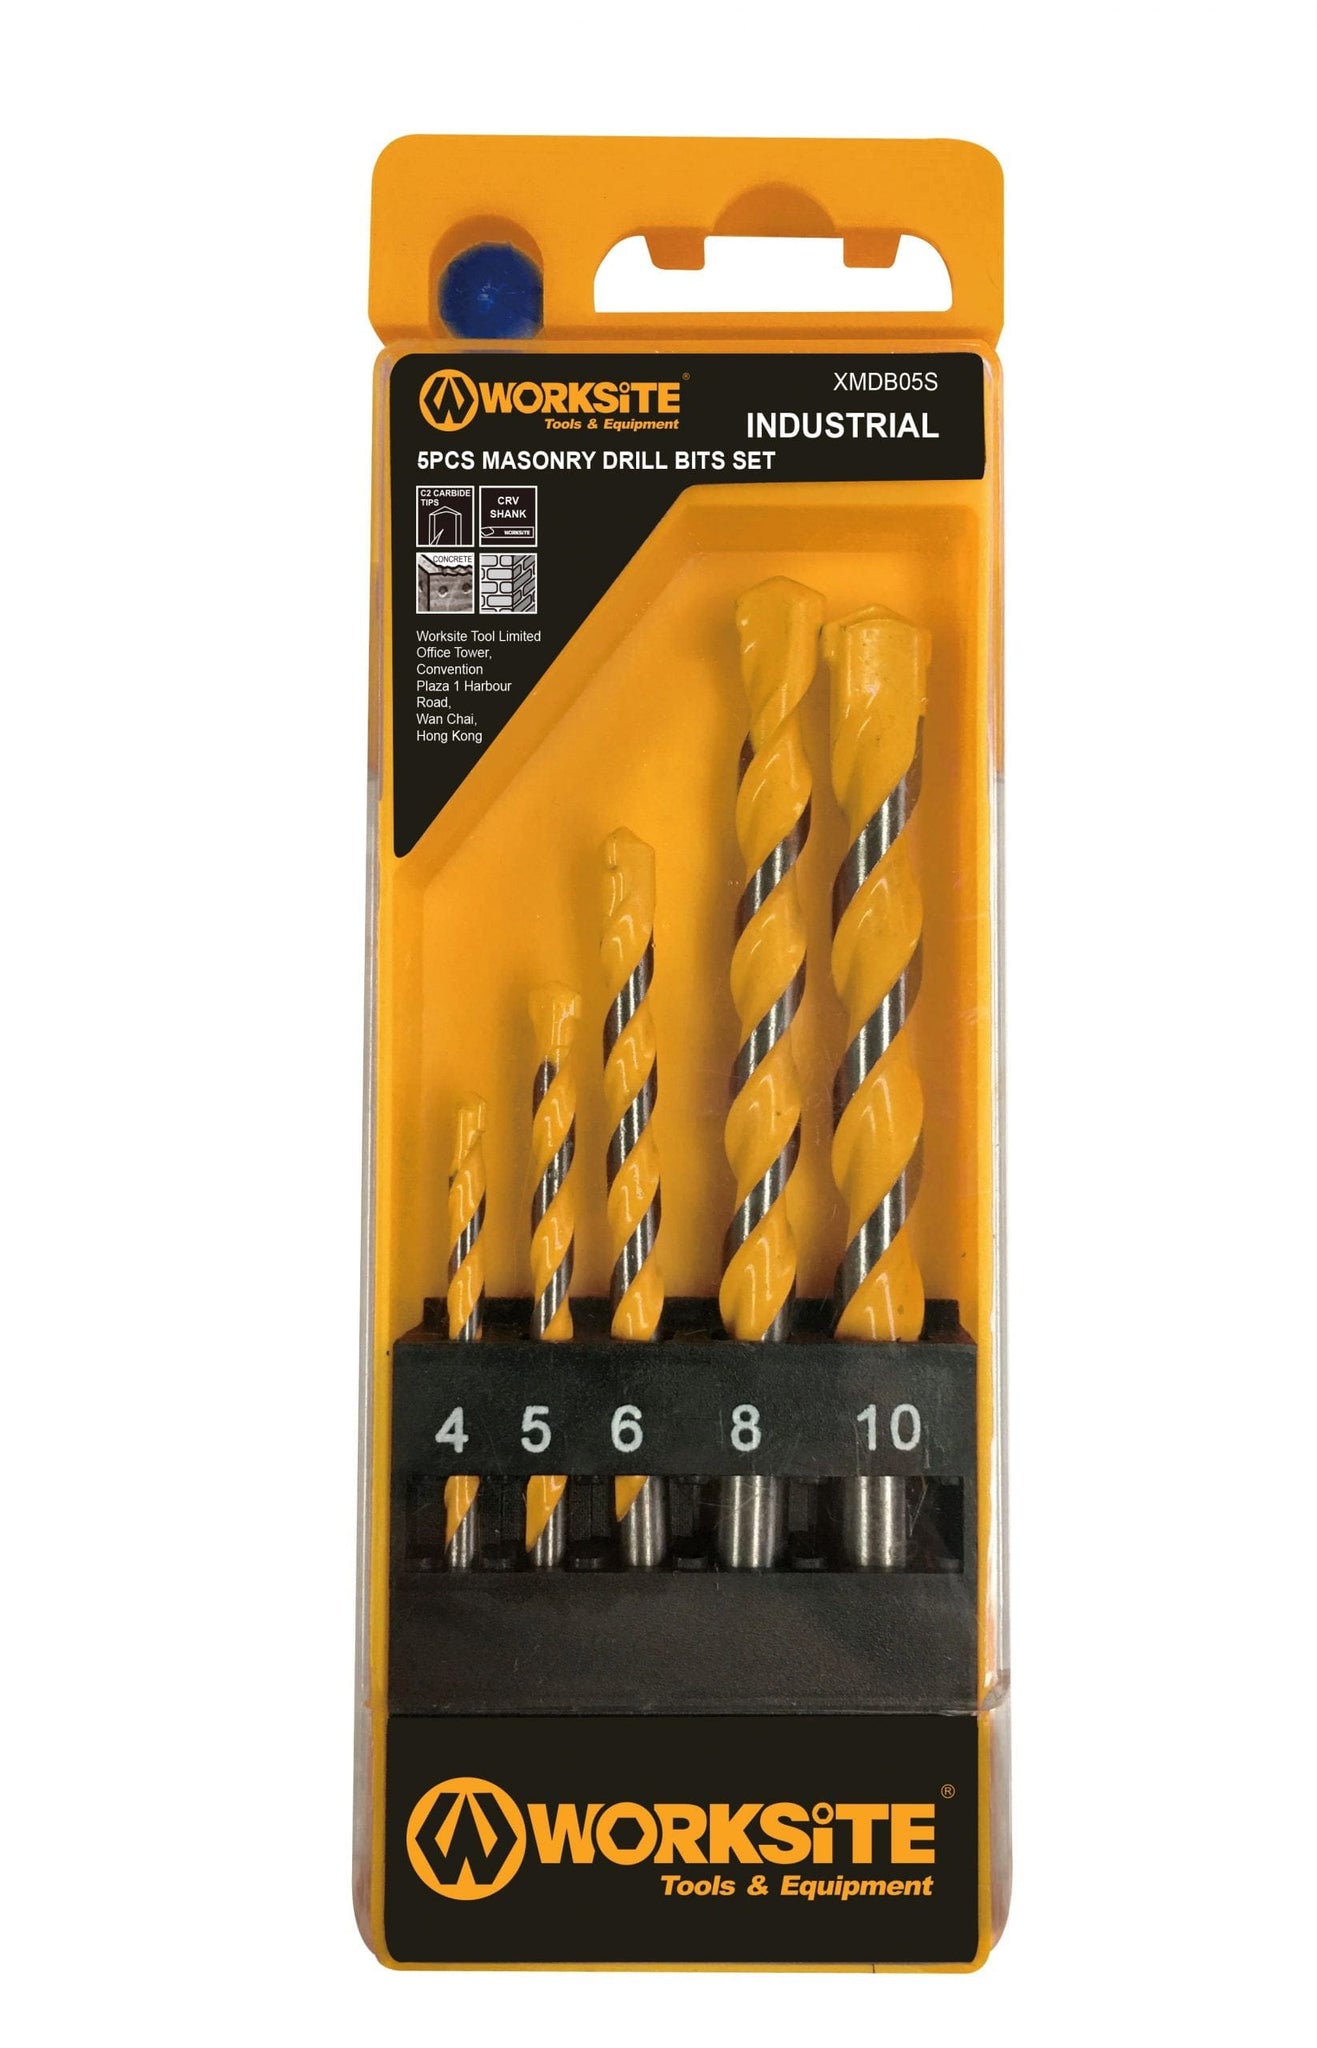 WORKSITE 5 Piece Masonry Drill Bit Set.  High-Speed Bit. Suitable For Drilling In Concrete Surfaces. Can Be Used on Glass/Brick/Plastic/Cement/Wood/Tile/EtcHigh Quality Multi-Purpose Drill Bit Set. Tipped For Prolonged Life And Heavy-Duty Use. – XMDB05S